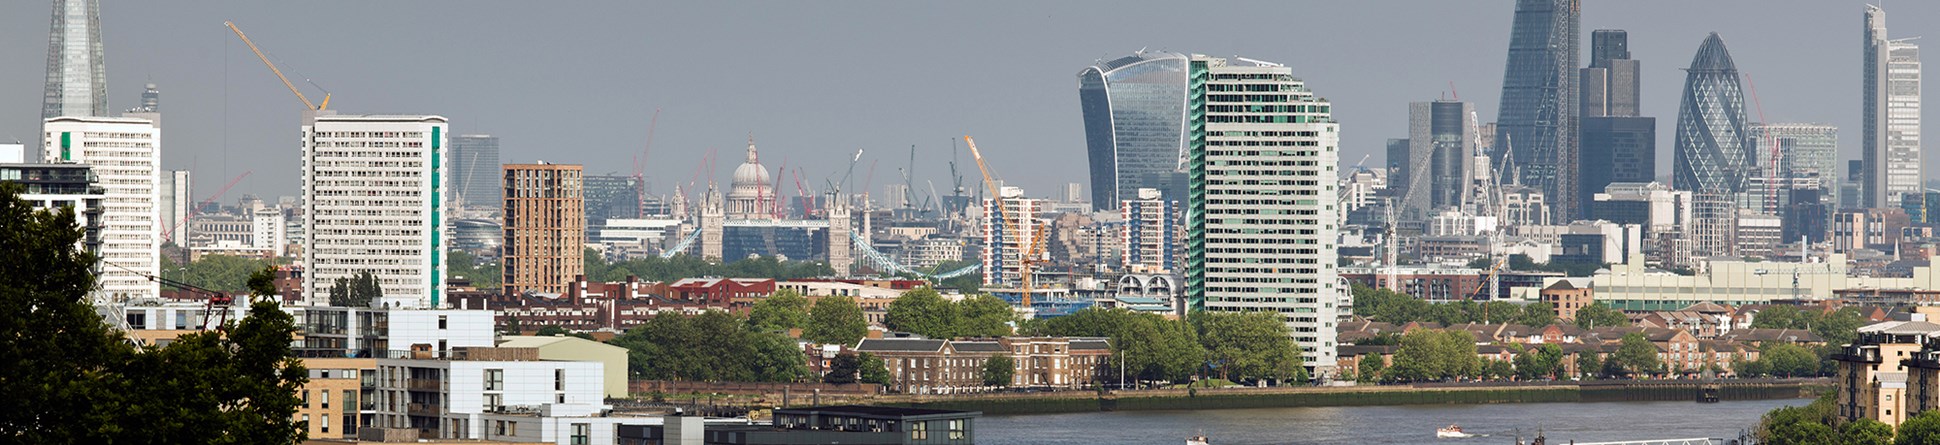 Panoramic view towards the City of London with high rise buildings